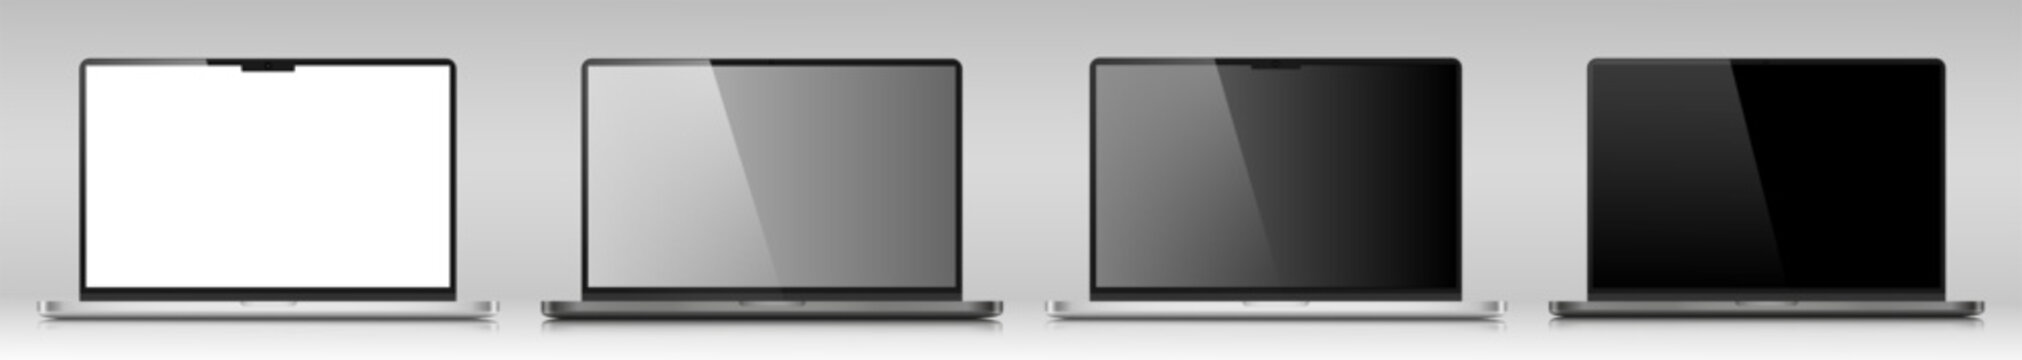 A set of realistic laptop layouts in a silver metal case with reflection. Laptops with white, gray and black screens on a gray gradient background. Vector illustration.